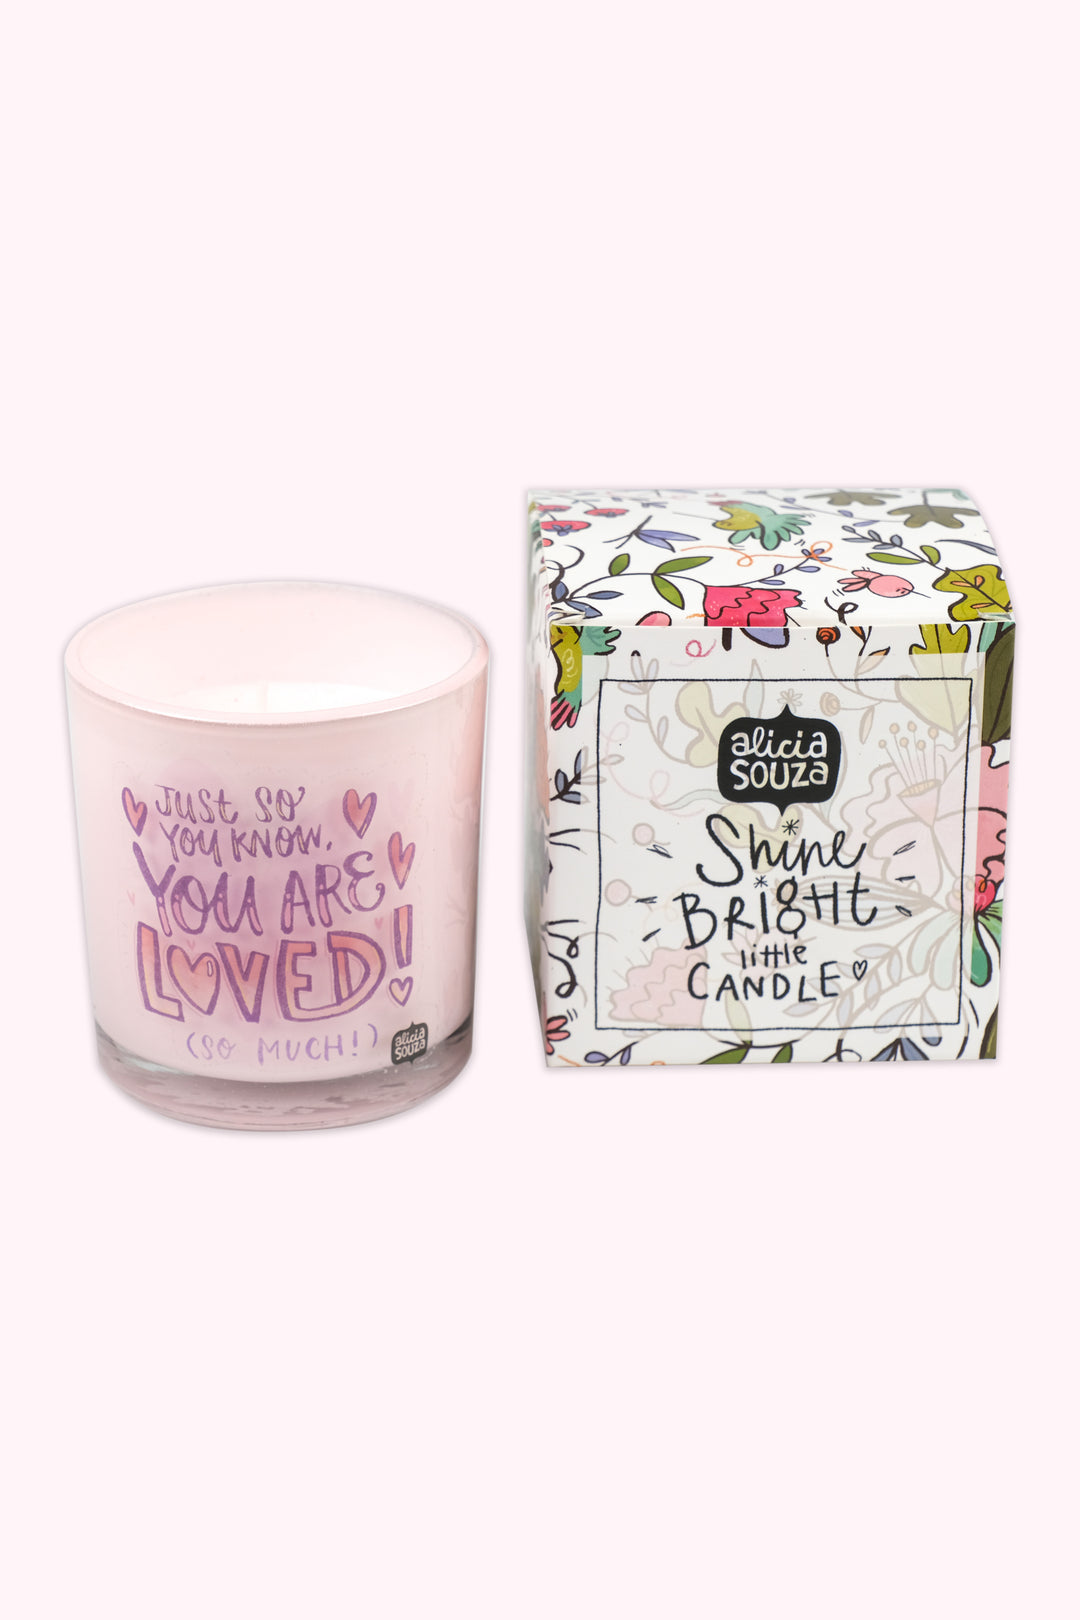 You Are Loved Scented Candle